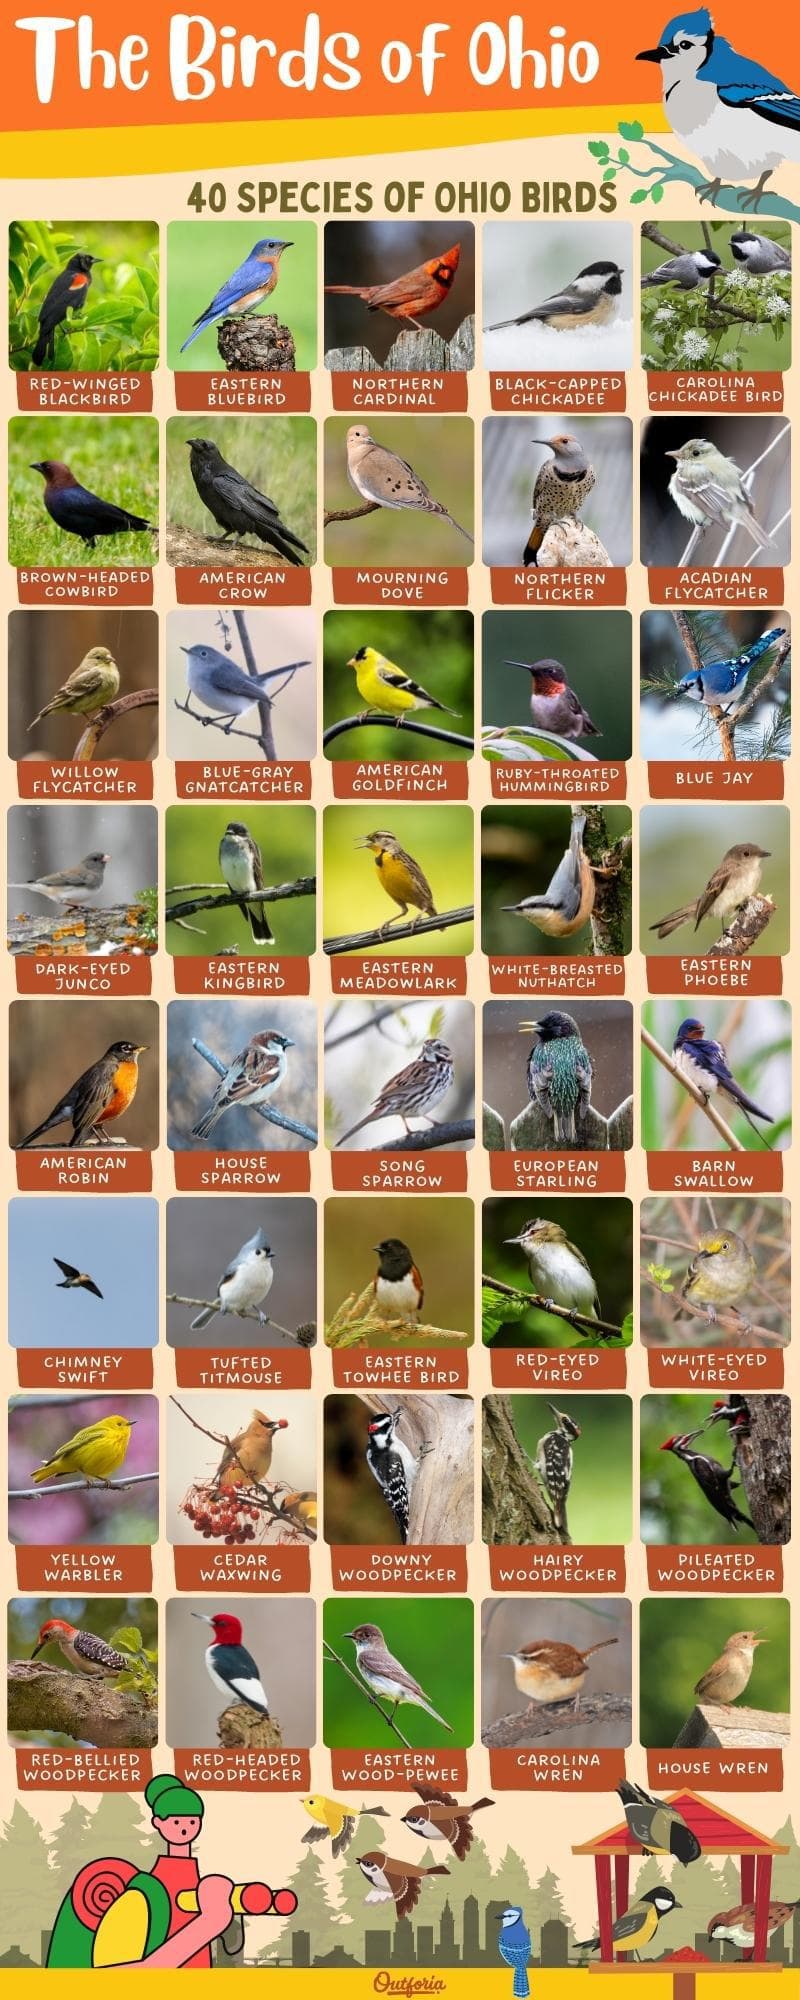 chart of images and names of Birds of Ohio